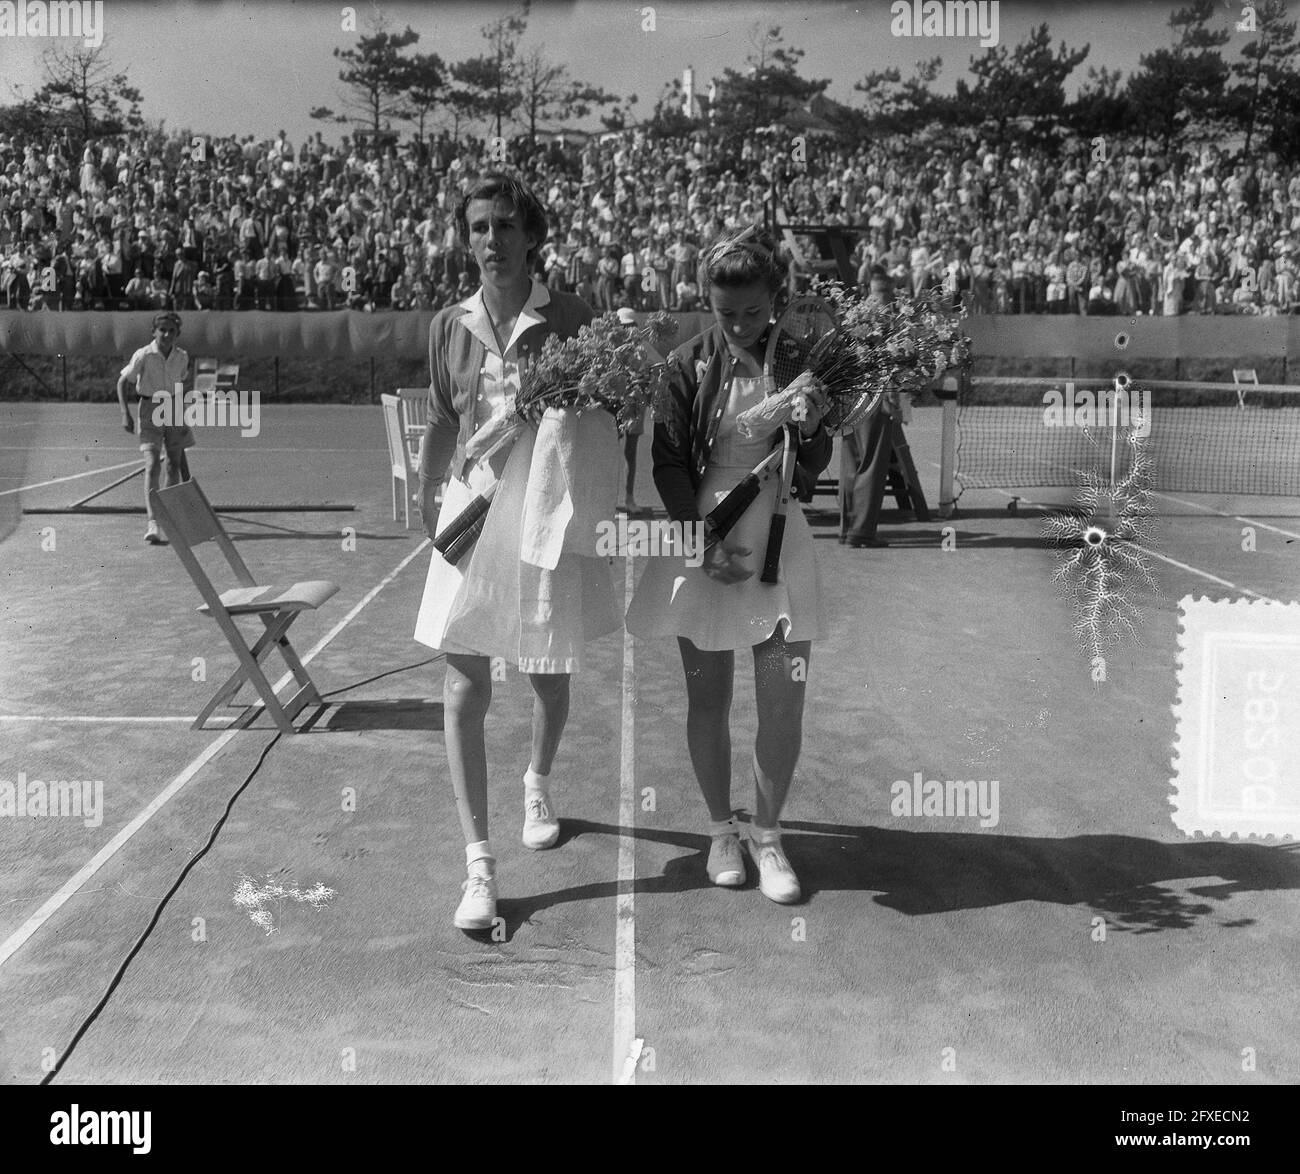 Tennis Noordwijk. Maureen Connolly (right) and Doris Hart (left), July 4, 1953, sports, tennis, The Netherlands, 20th century press agency photo, news to remember, documentary, historic photography 1945-1990, visual stories, human history of the Twentieth Century, capturing moments in time Stock Photo